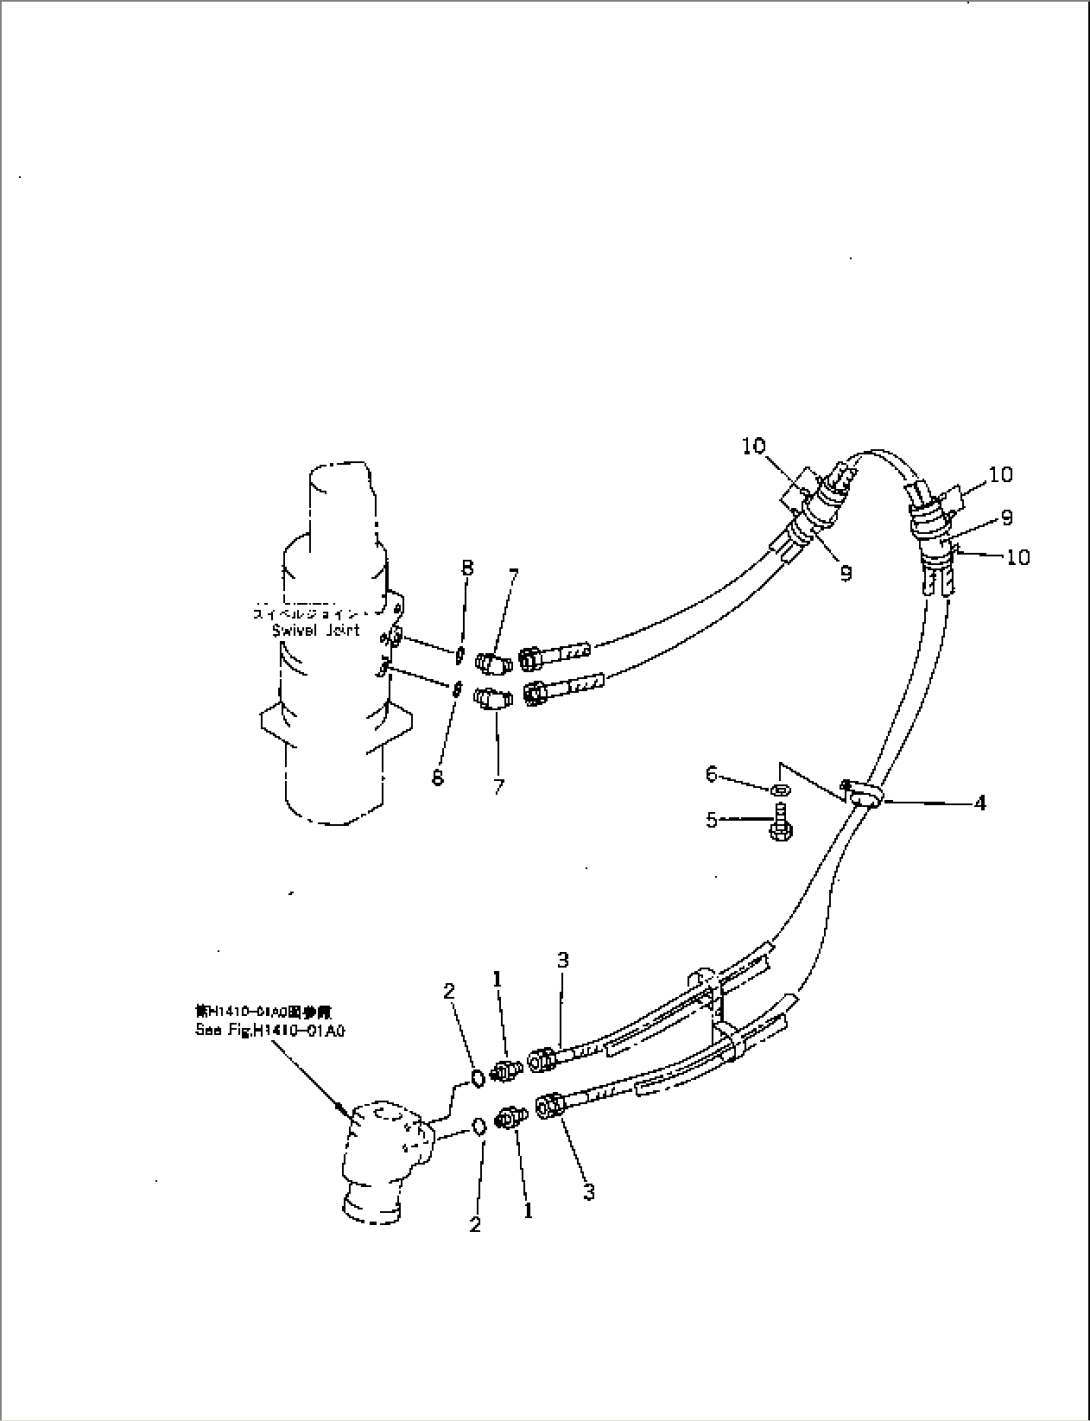 STEERING PIPING (VALVE TO/FROM SWIVEL JOINT)